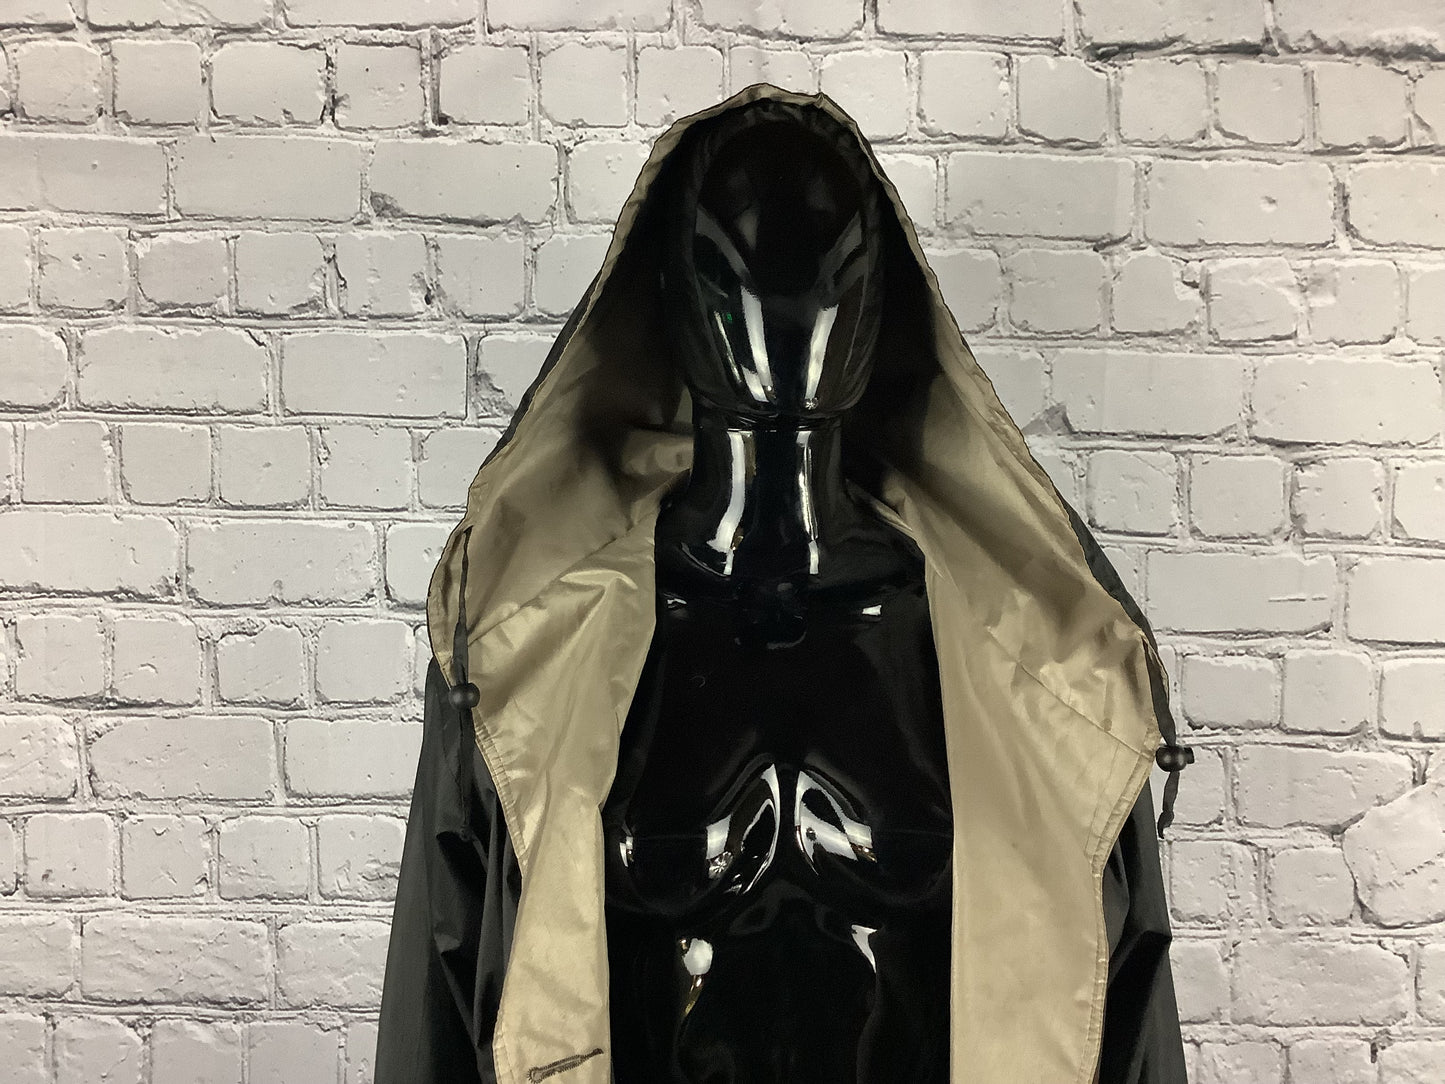 1980's Vintage Black Trench Coat with Metallic Lining